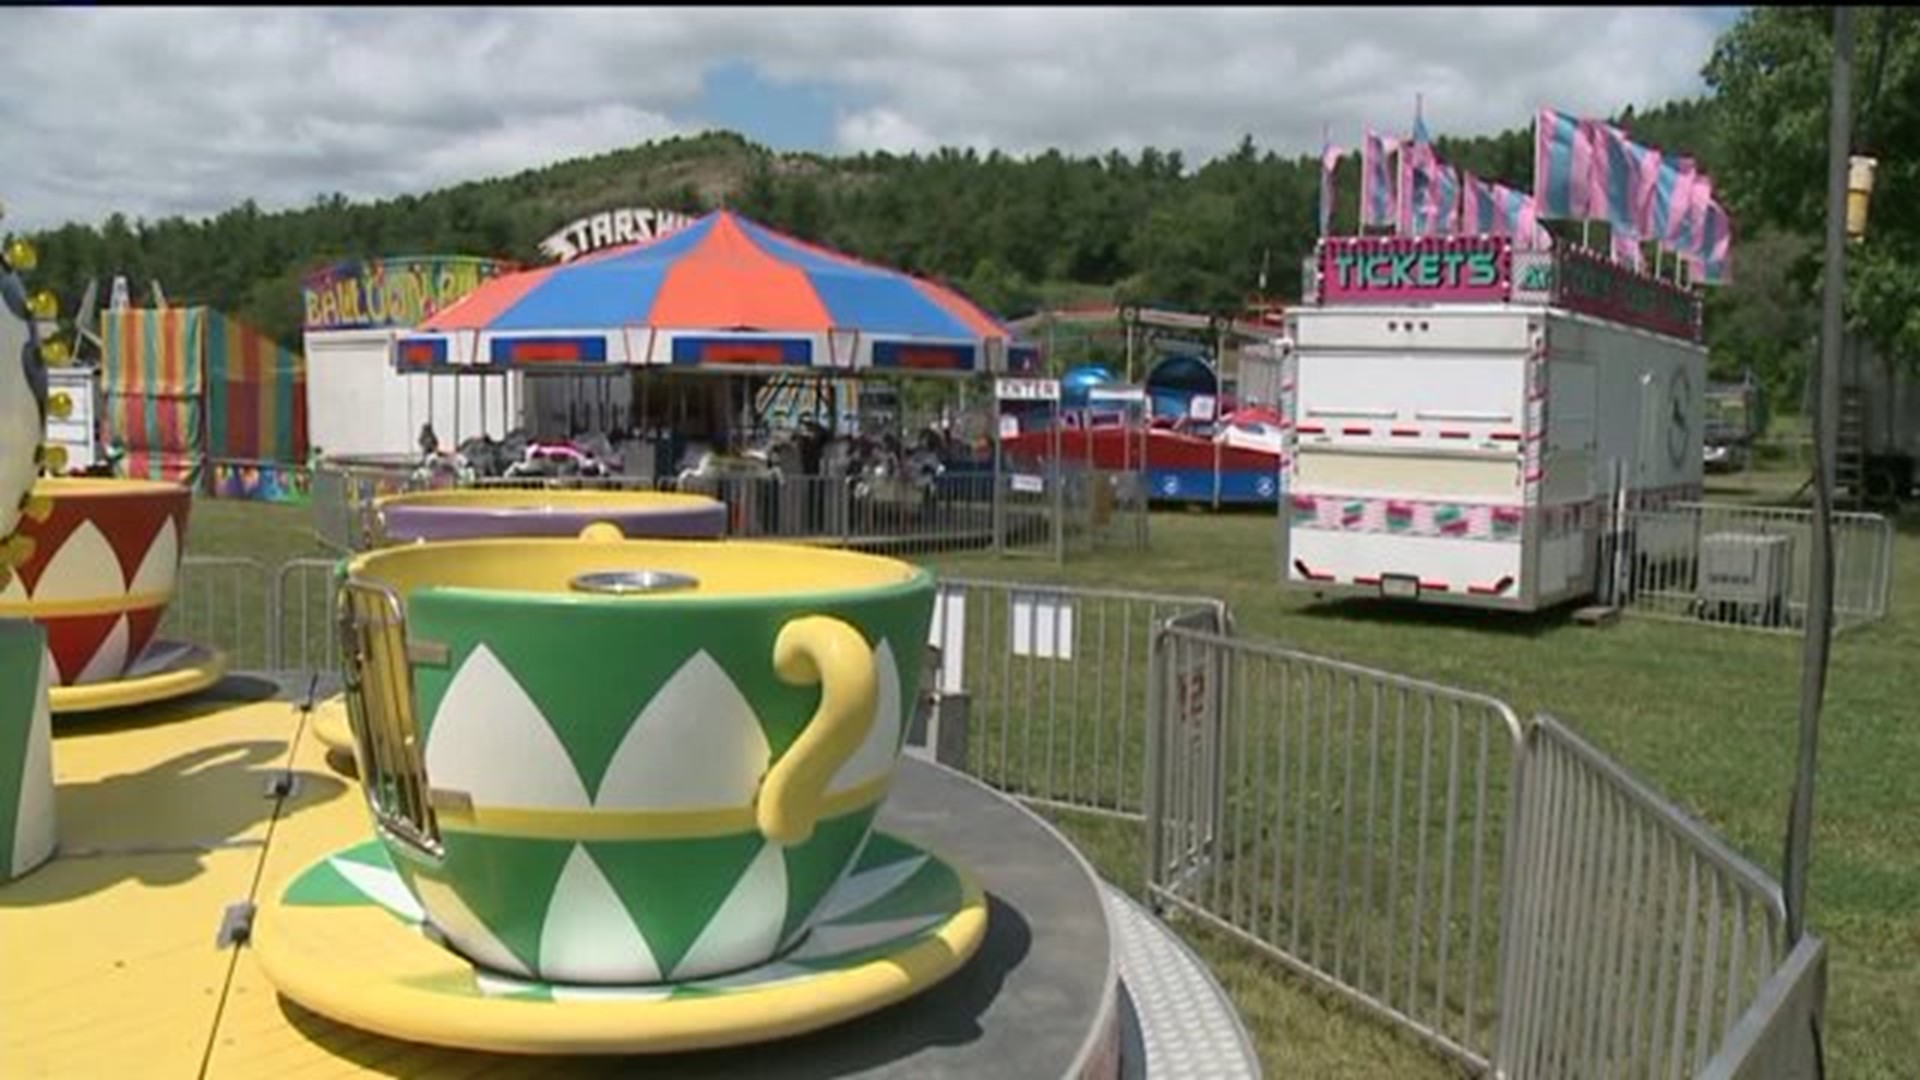 Carbon County Fair Adds More Dates, Rides